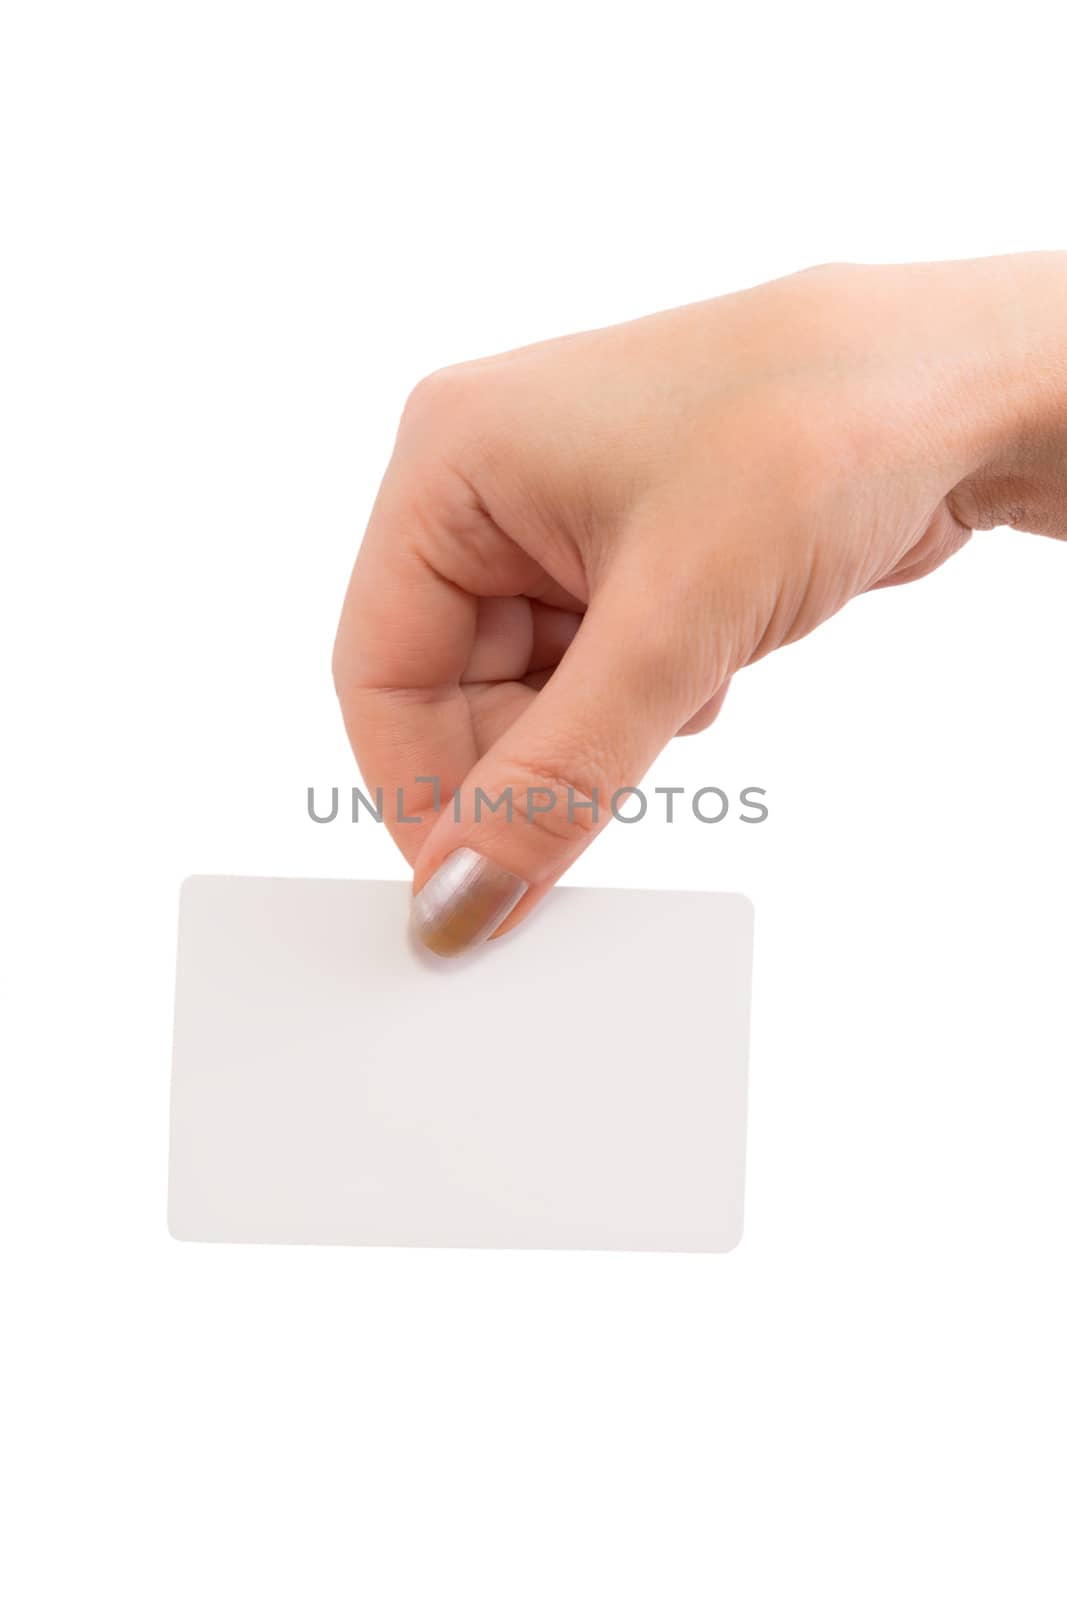 The hand holding a business card isolated